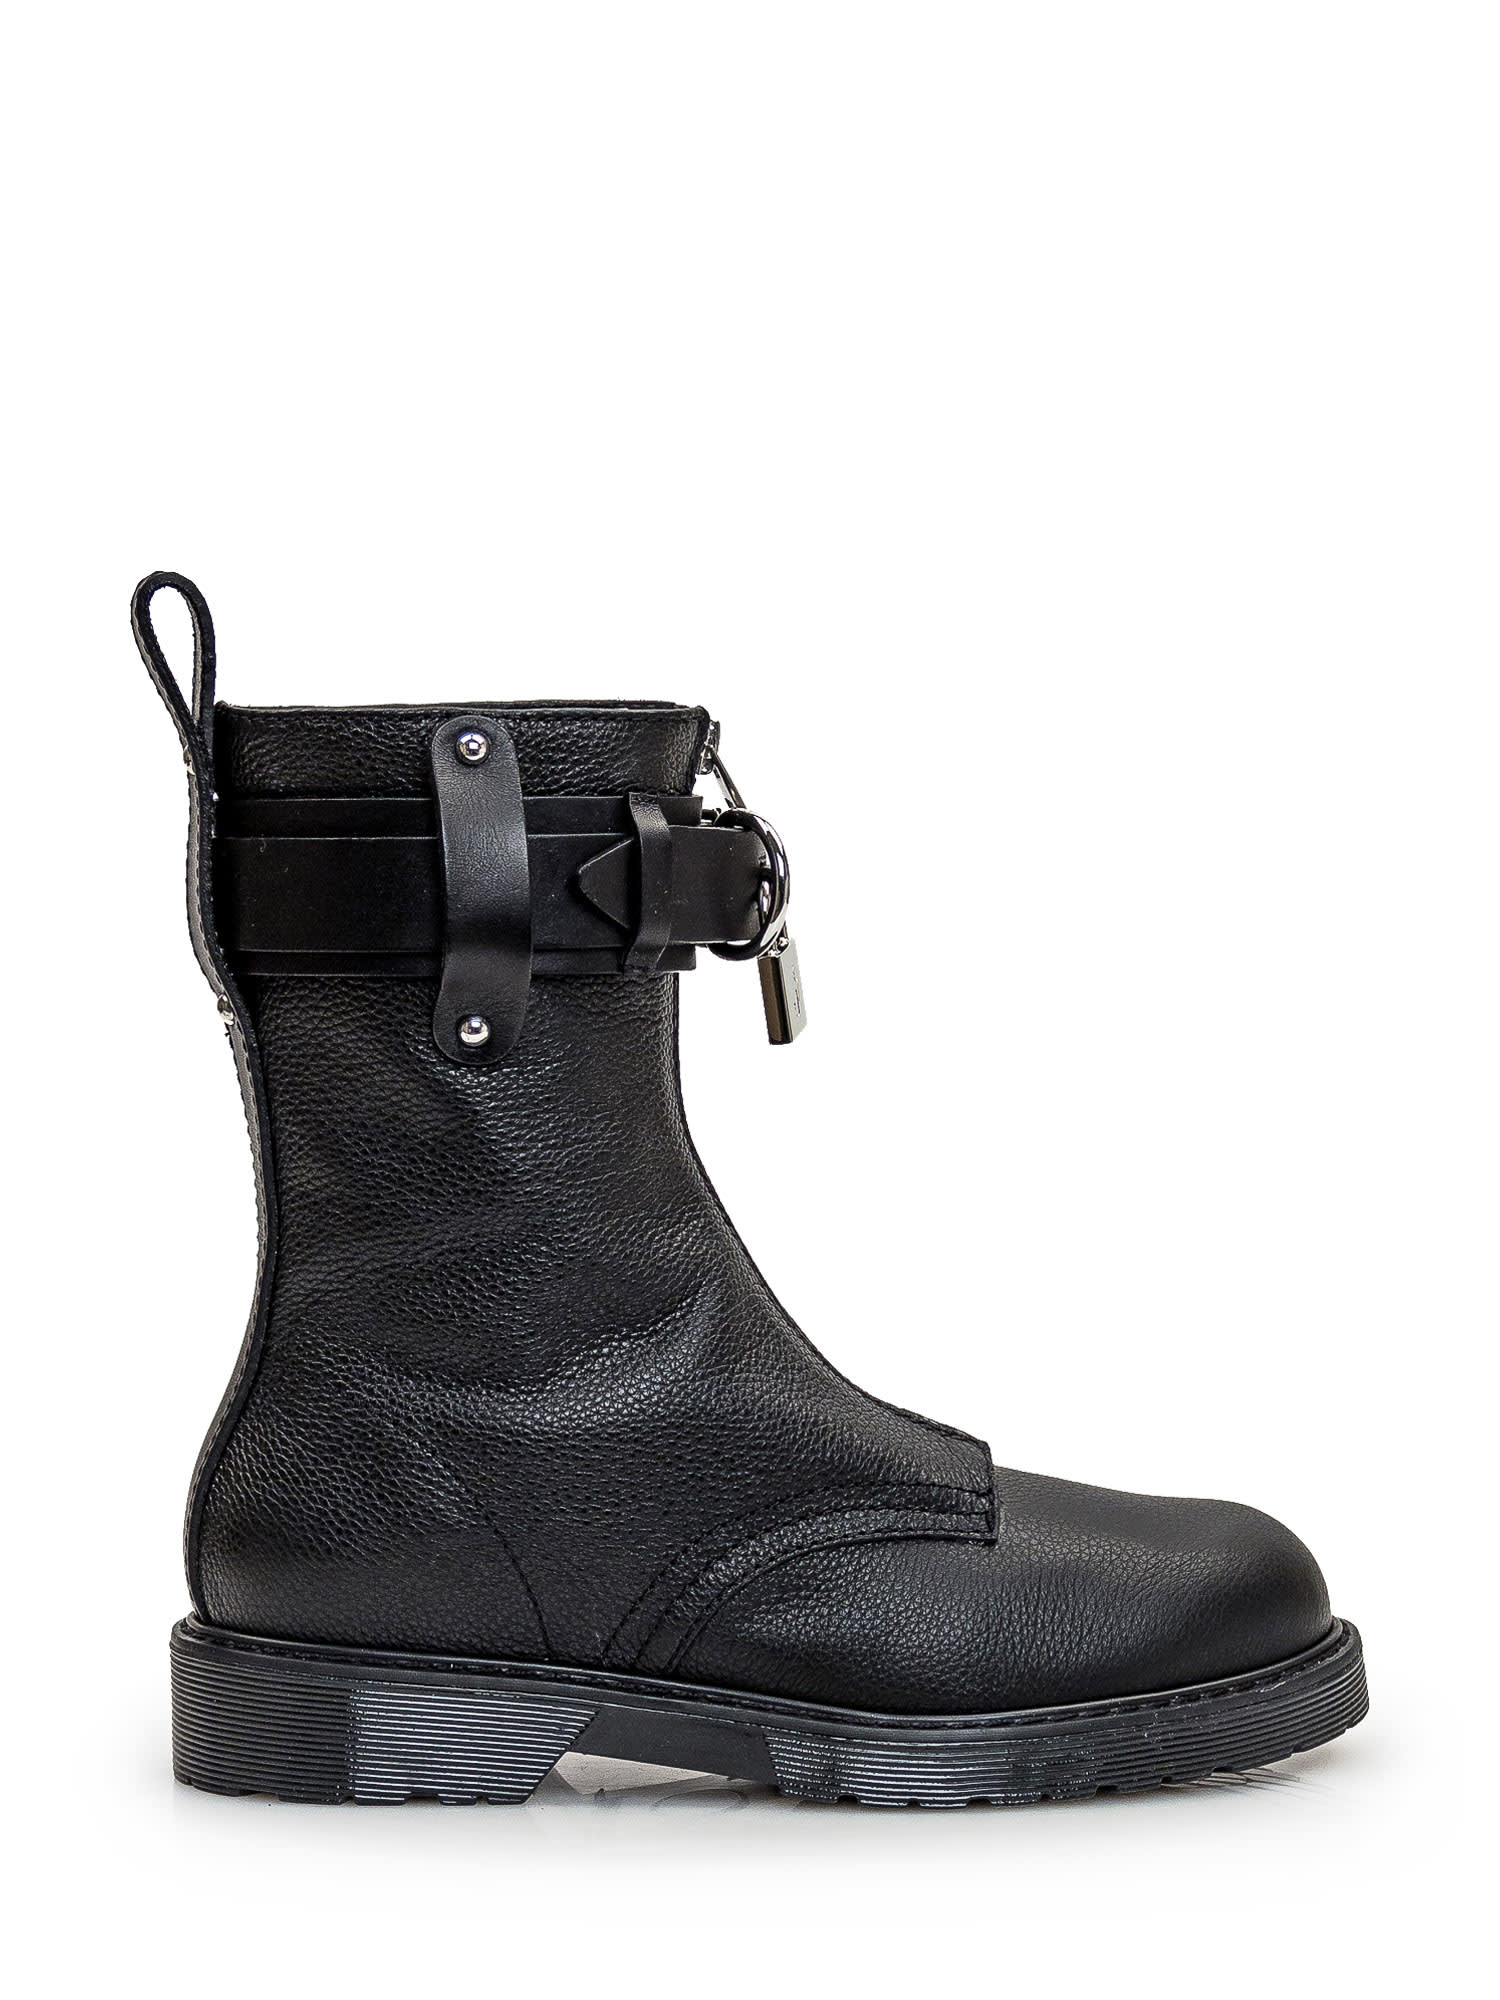 JW ANDERSON PUNK BOOT